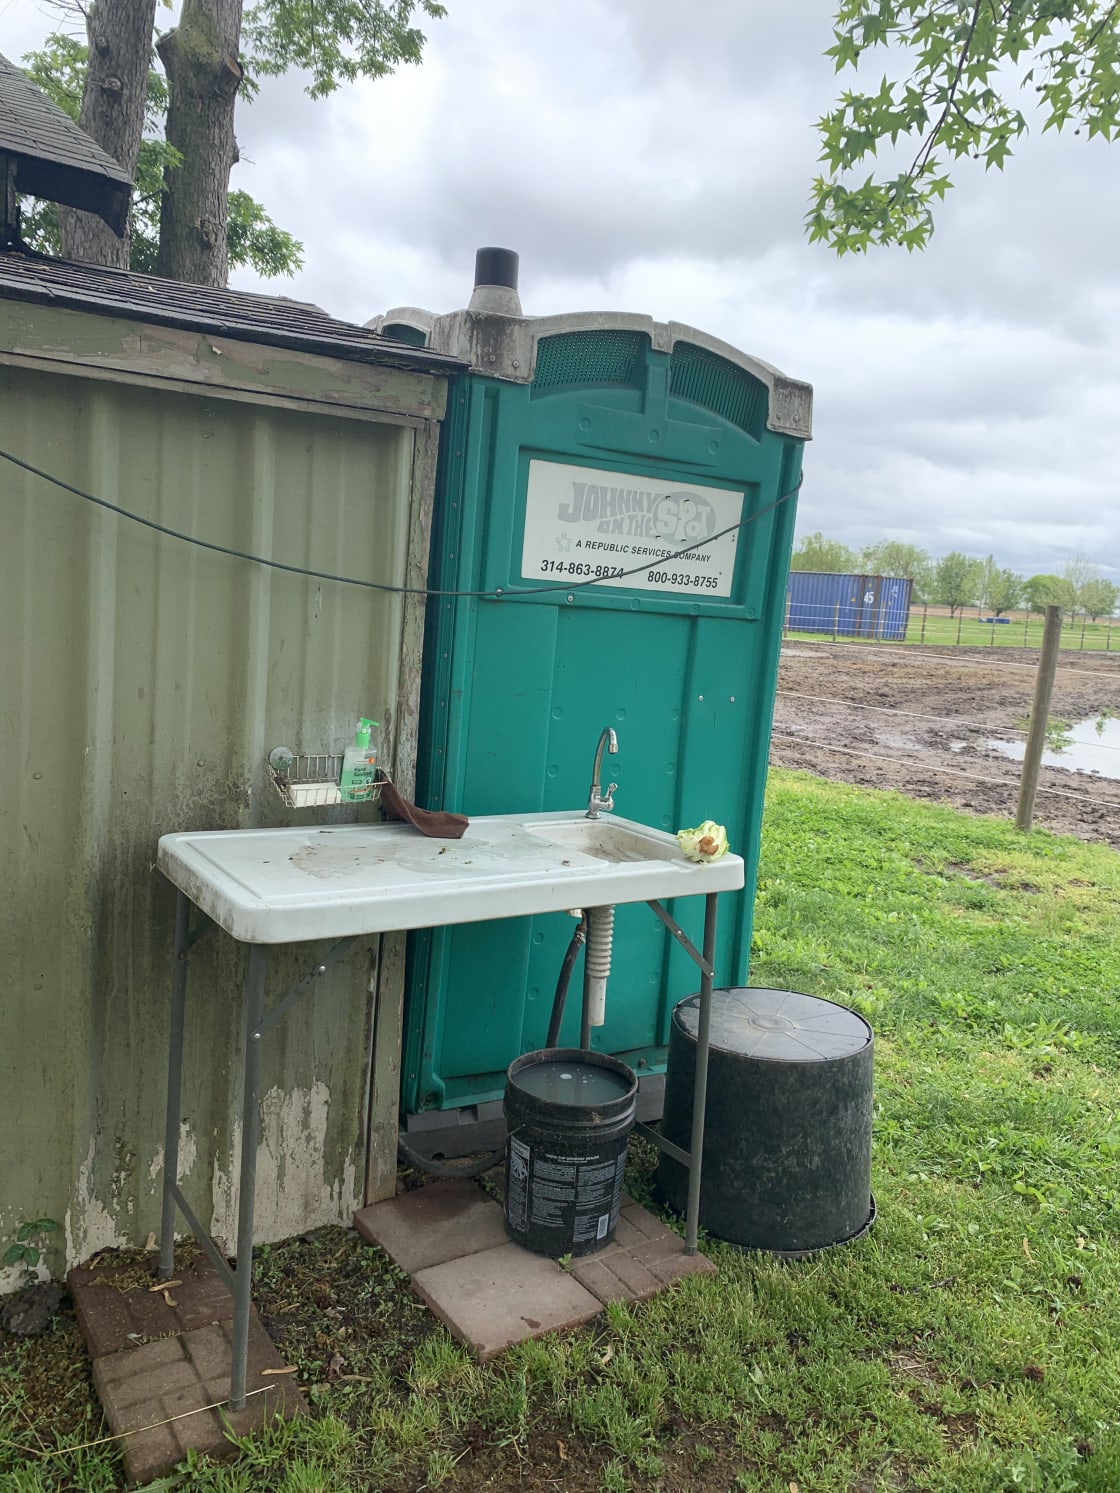 Wash station and porta potty.  Wash station is cold well water only.  